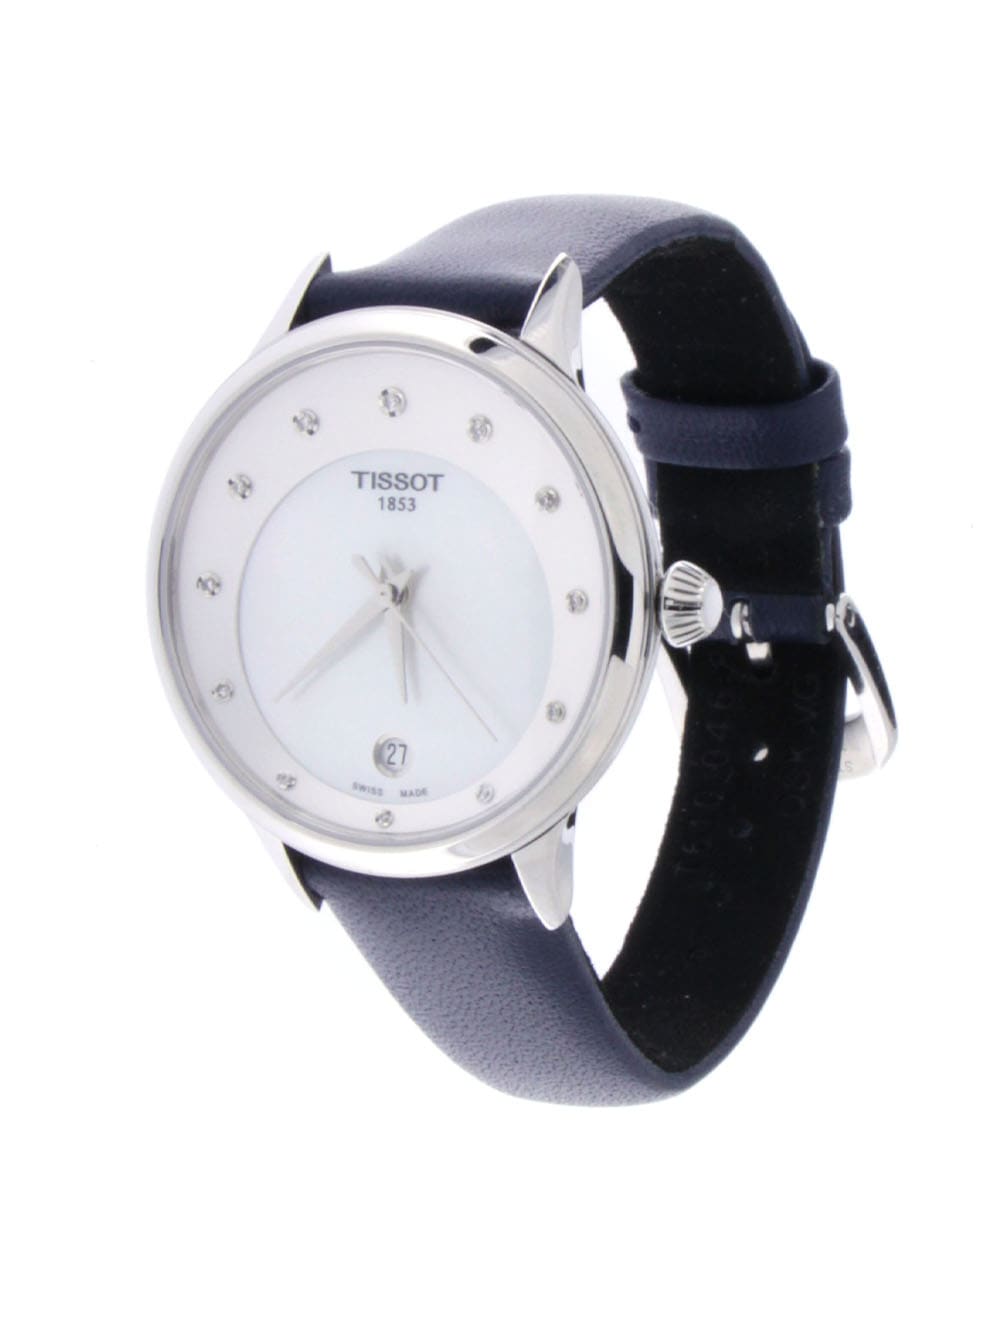 Tissot T-lady T1332101611600 Blue Leather Strap Womens Watch Watches